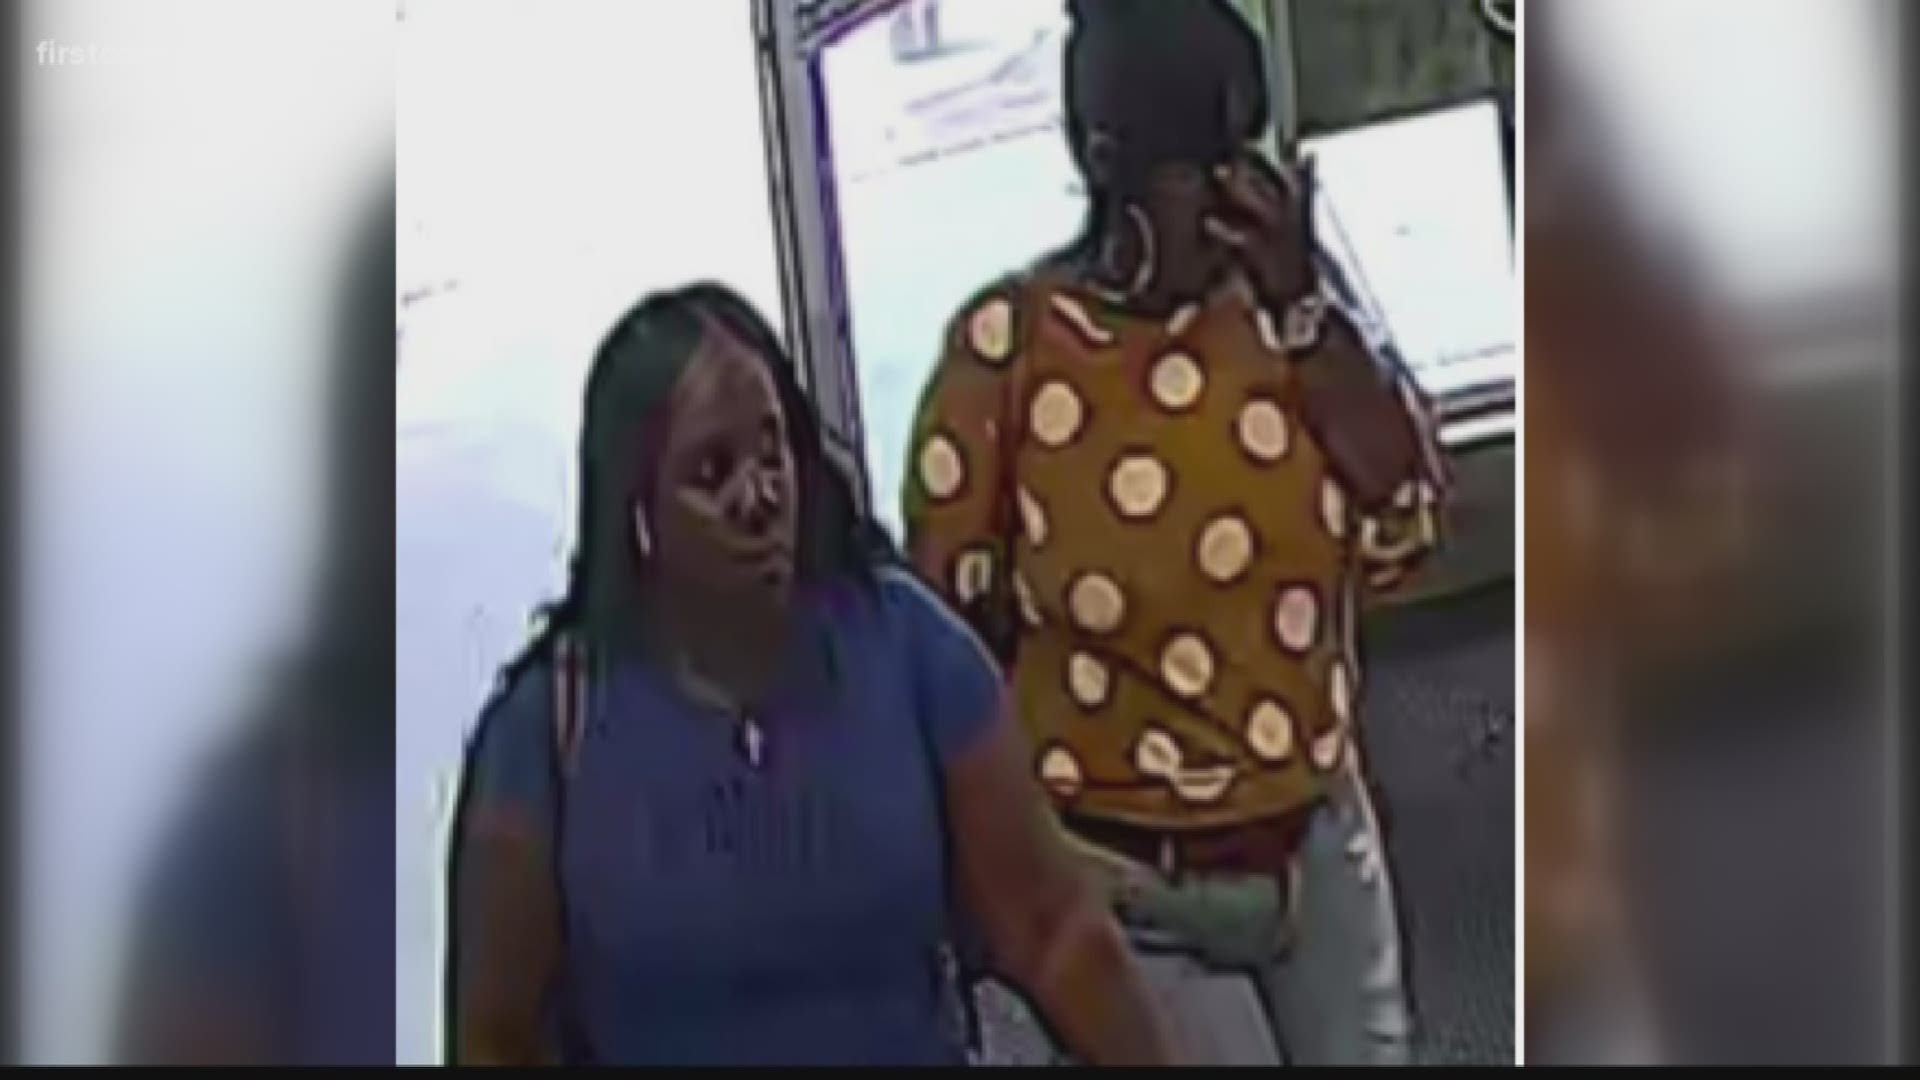 According to police, two women entered a Publix, Wal-Mart and JCPenny on Oct. 12 and used credit cards that didn't belong to them.